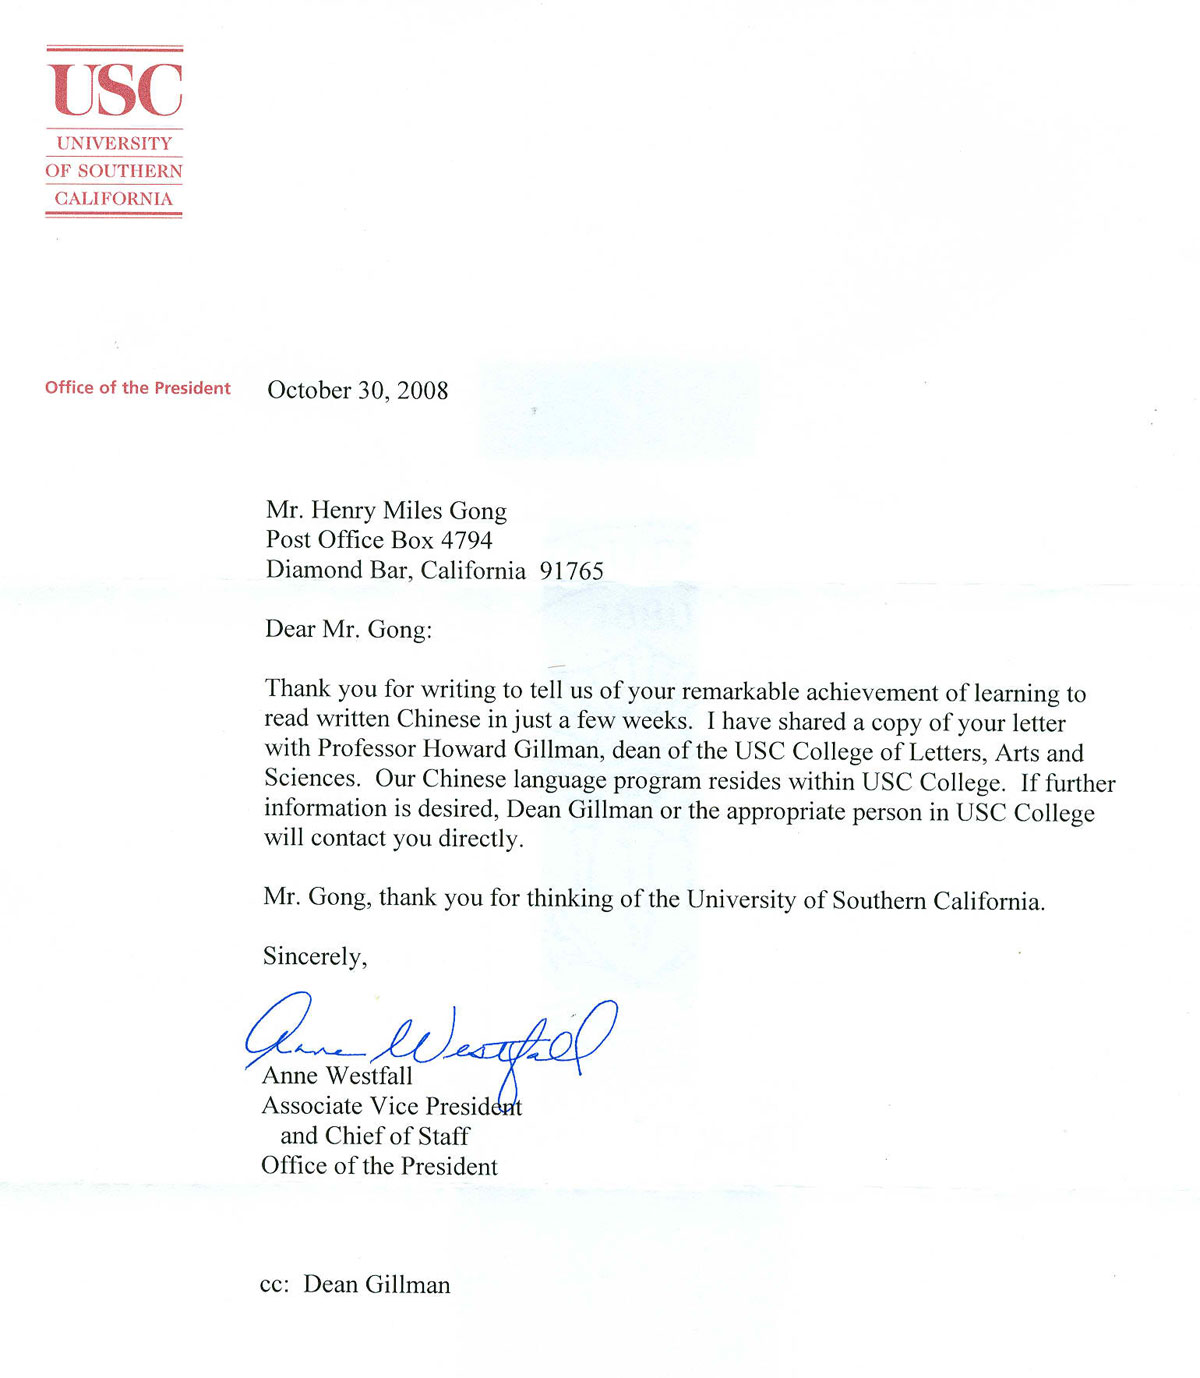 University of Southern California Review Letter